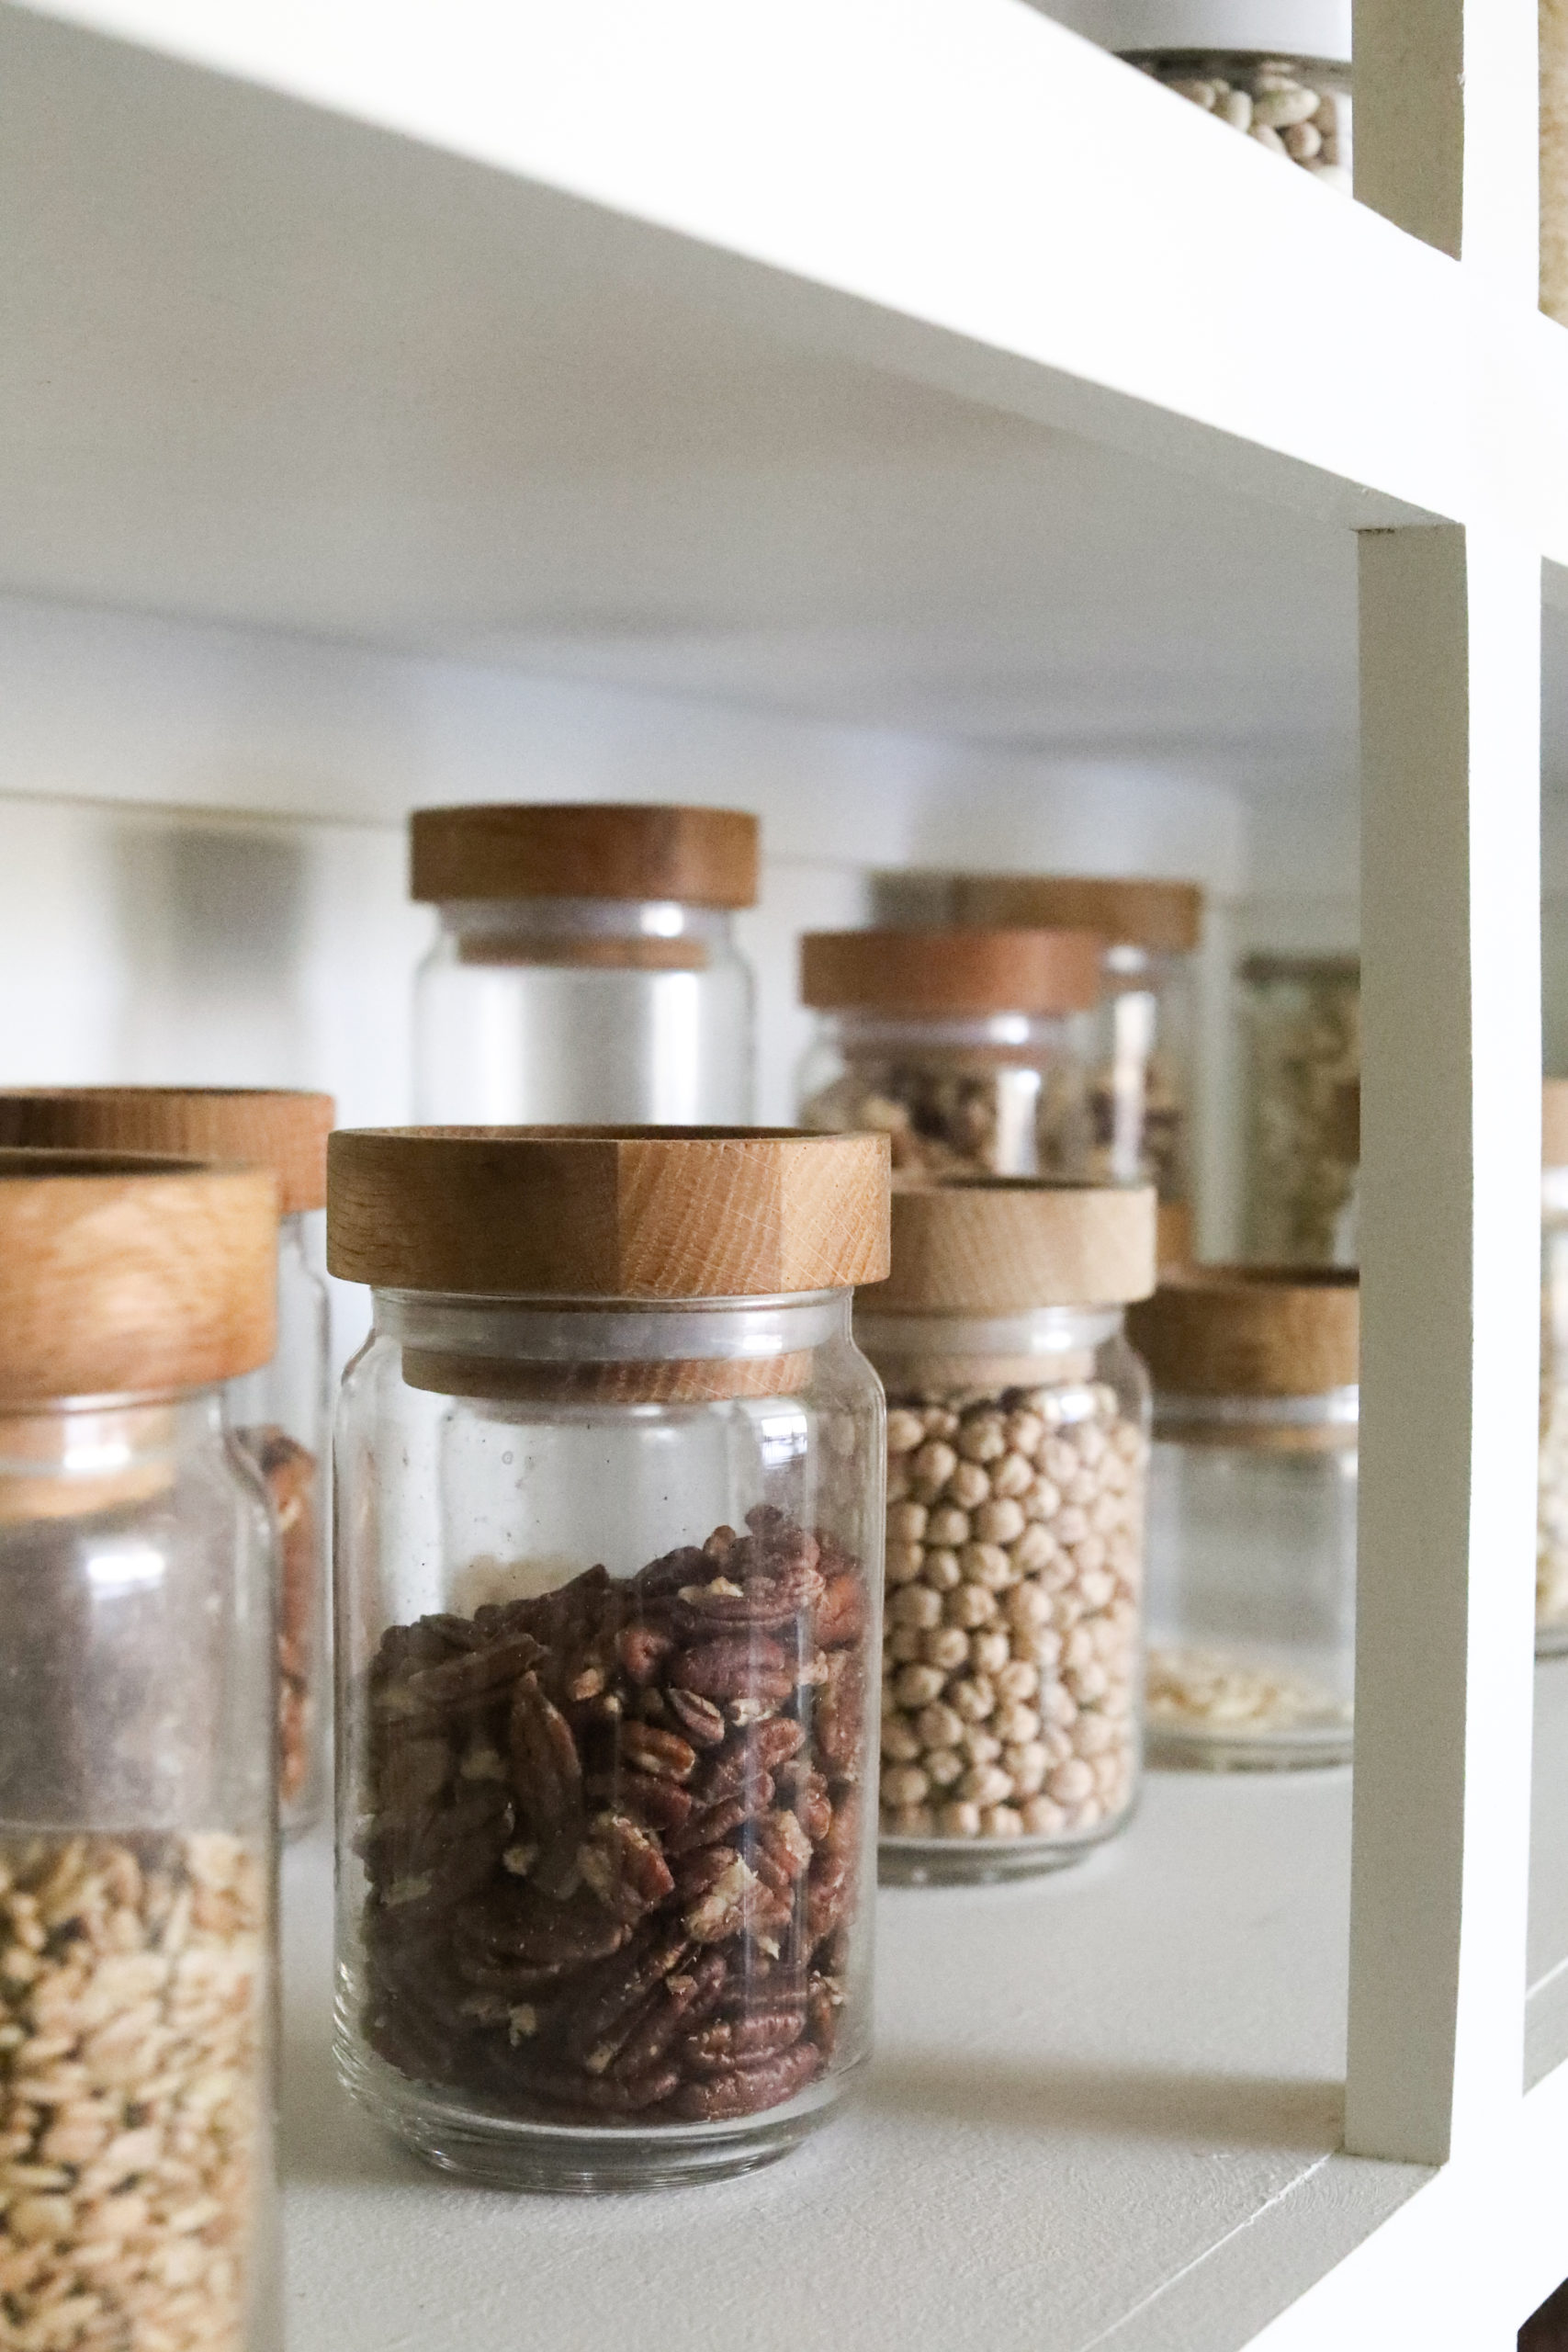 10 Pantry Essentials that Every Kitchen Needs 